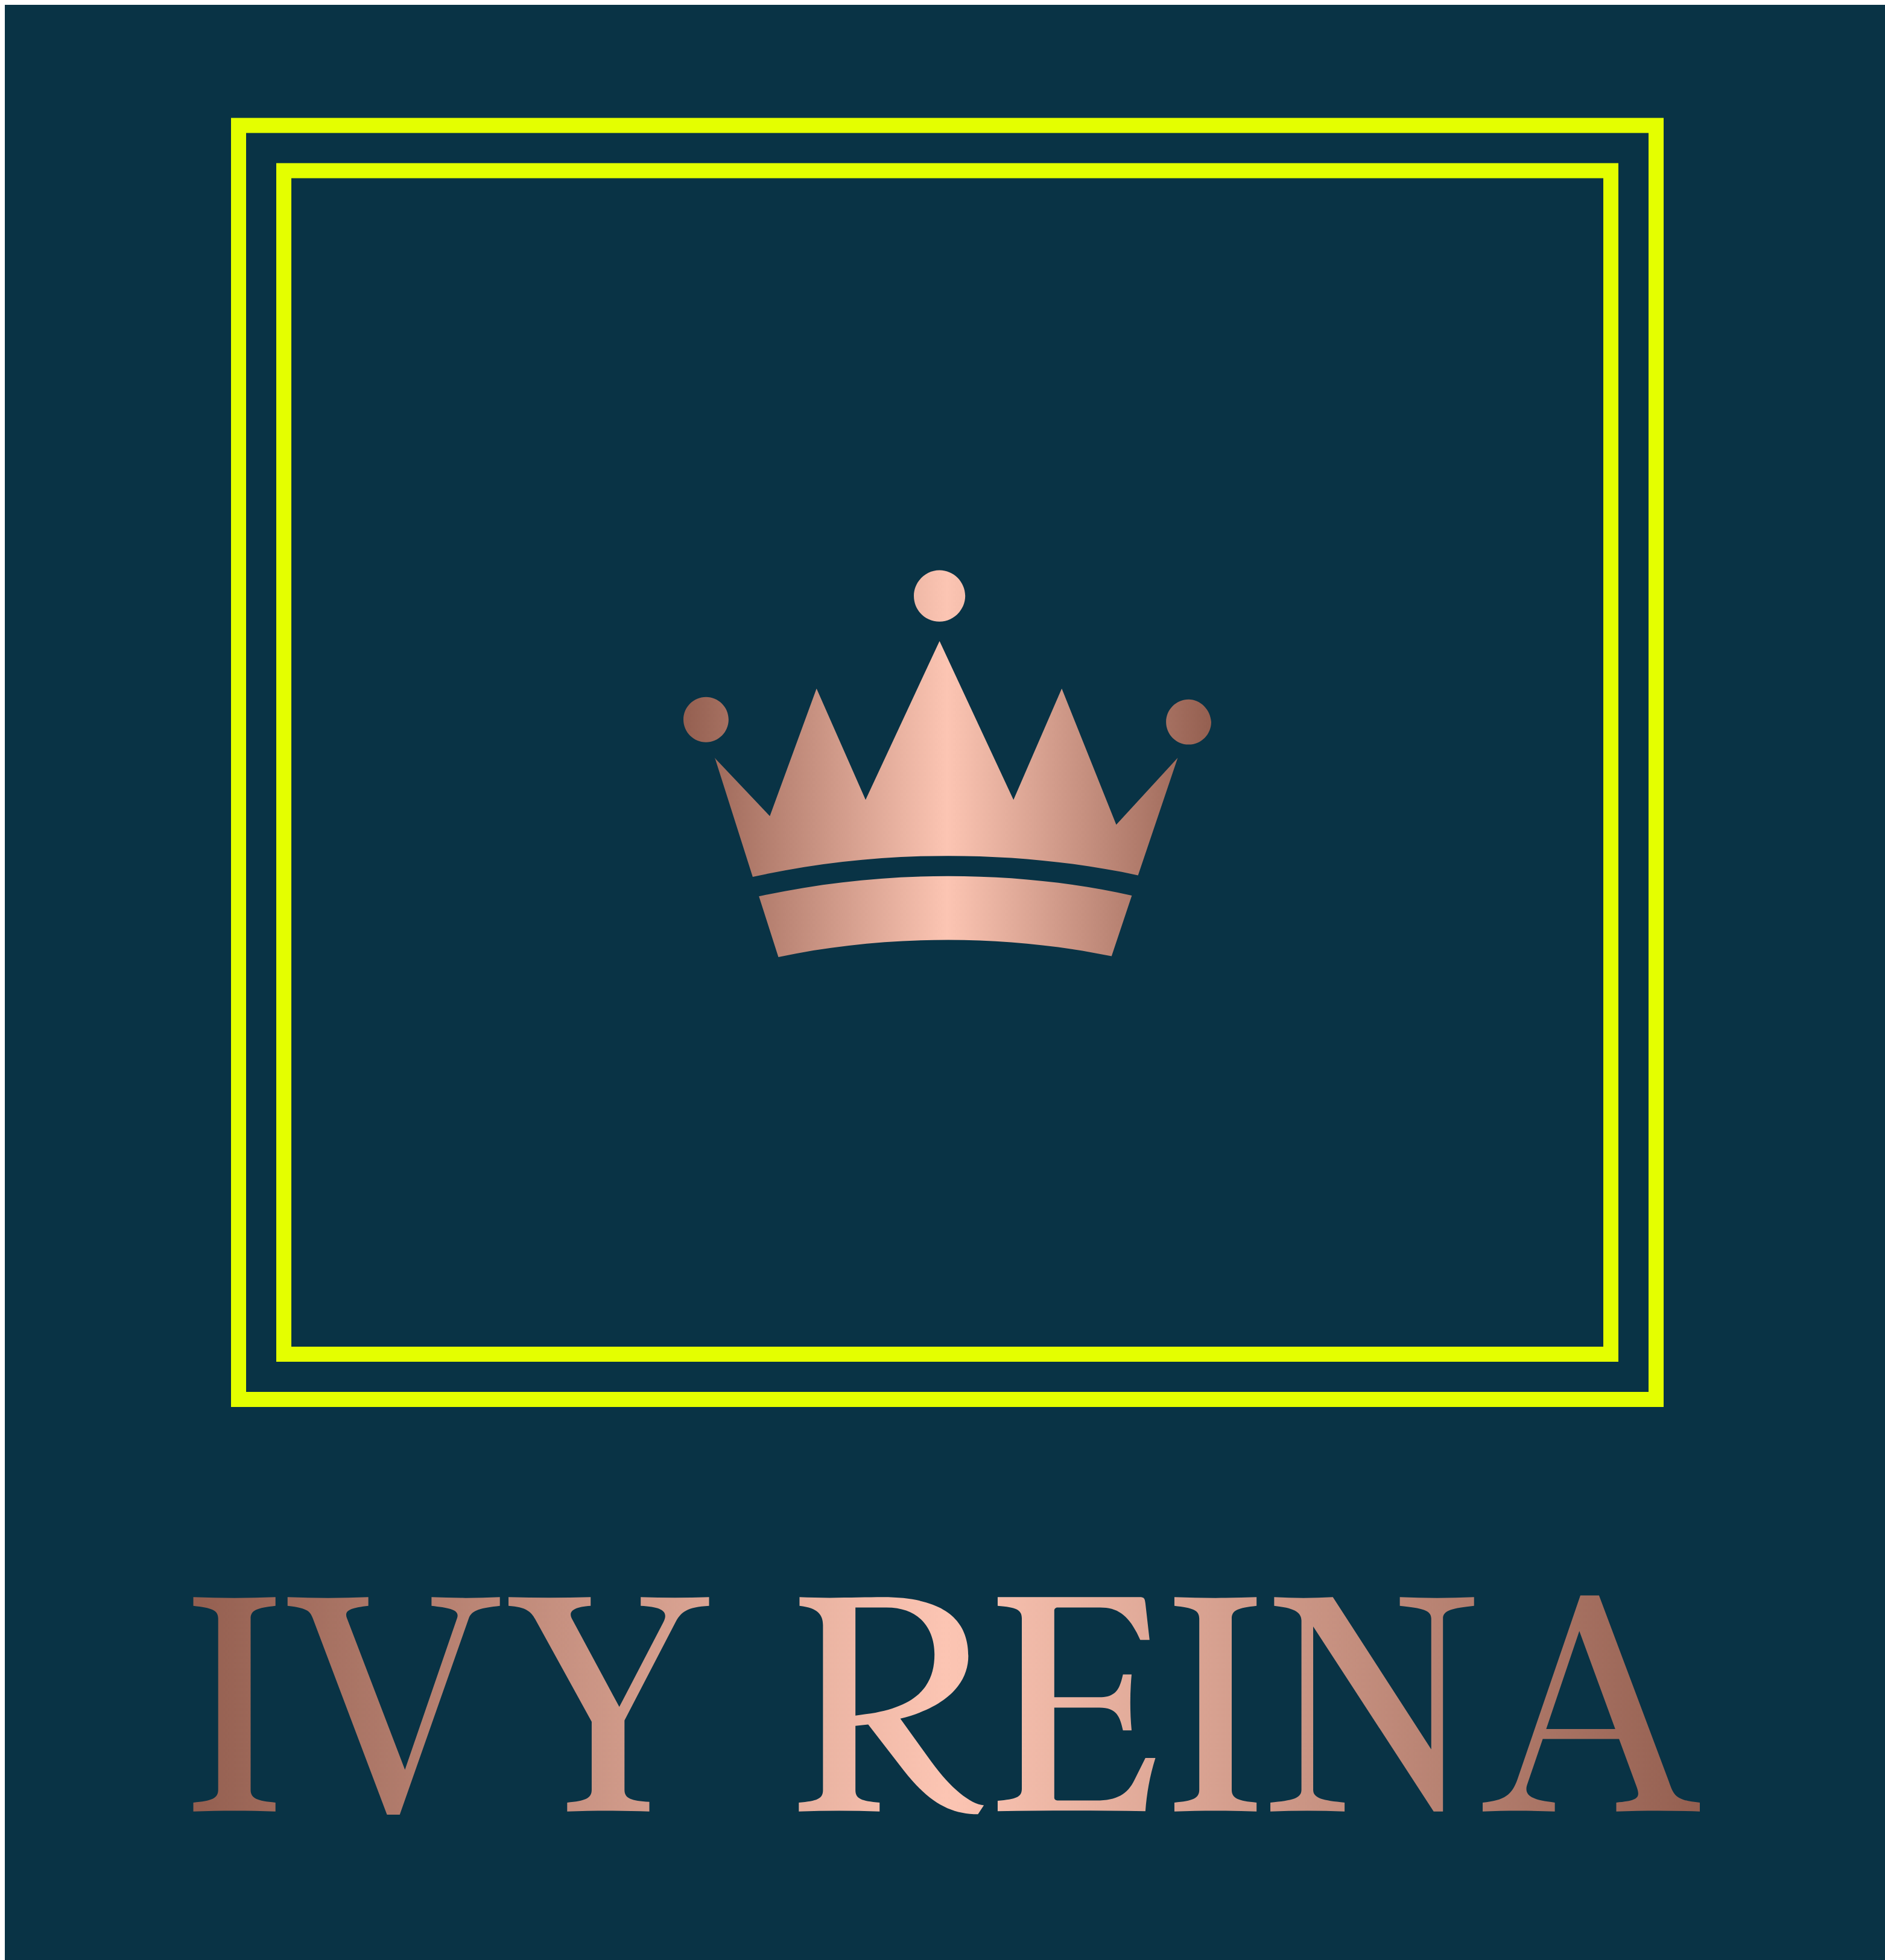 The logo or business face of "Ivy Reina"